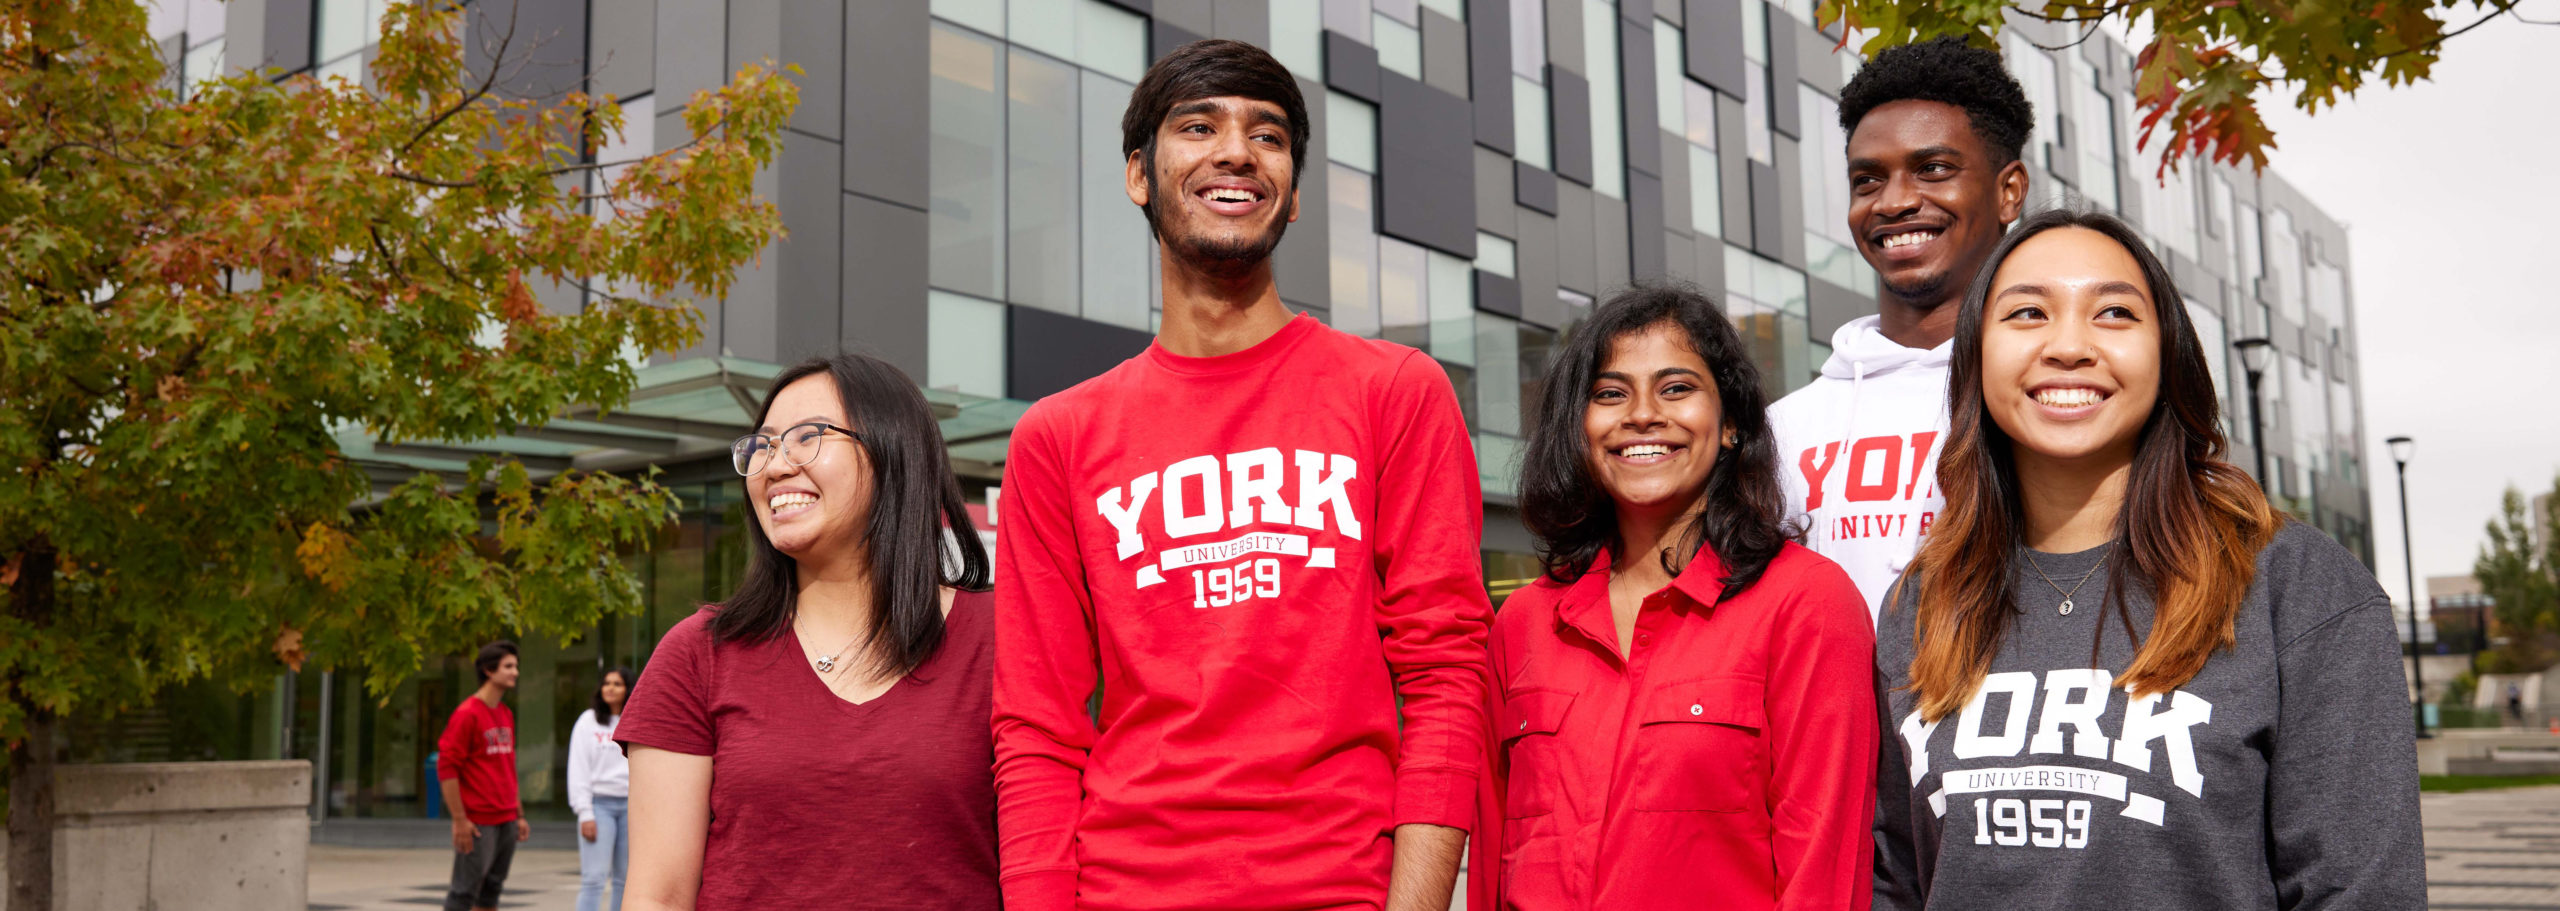 A group of five smiling students wearing York branded clothing.